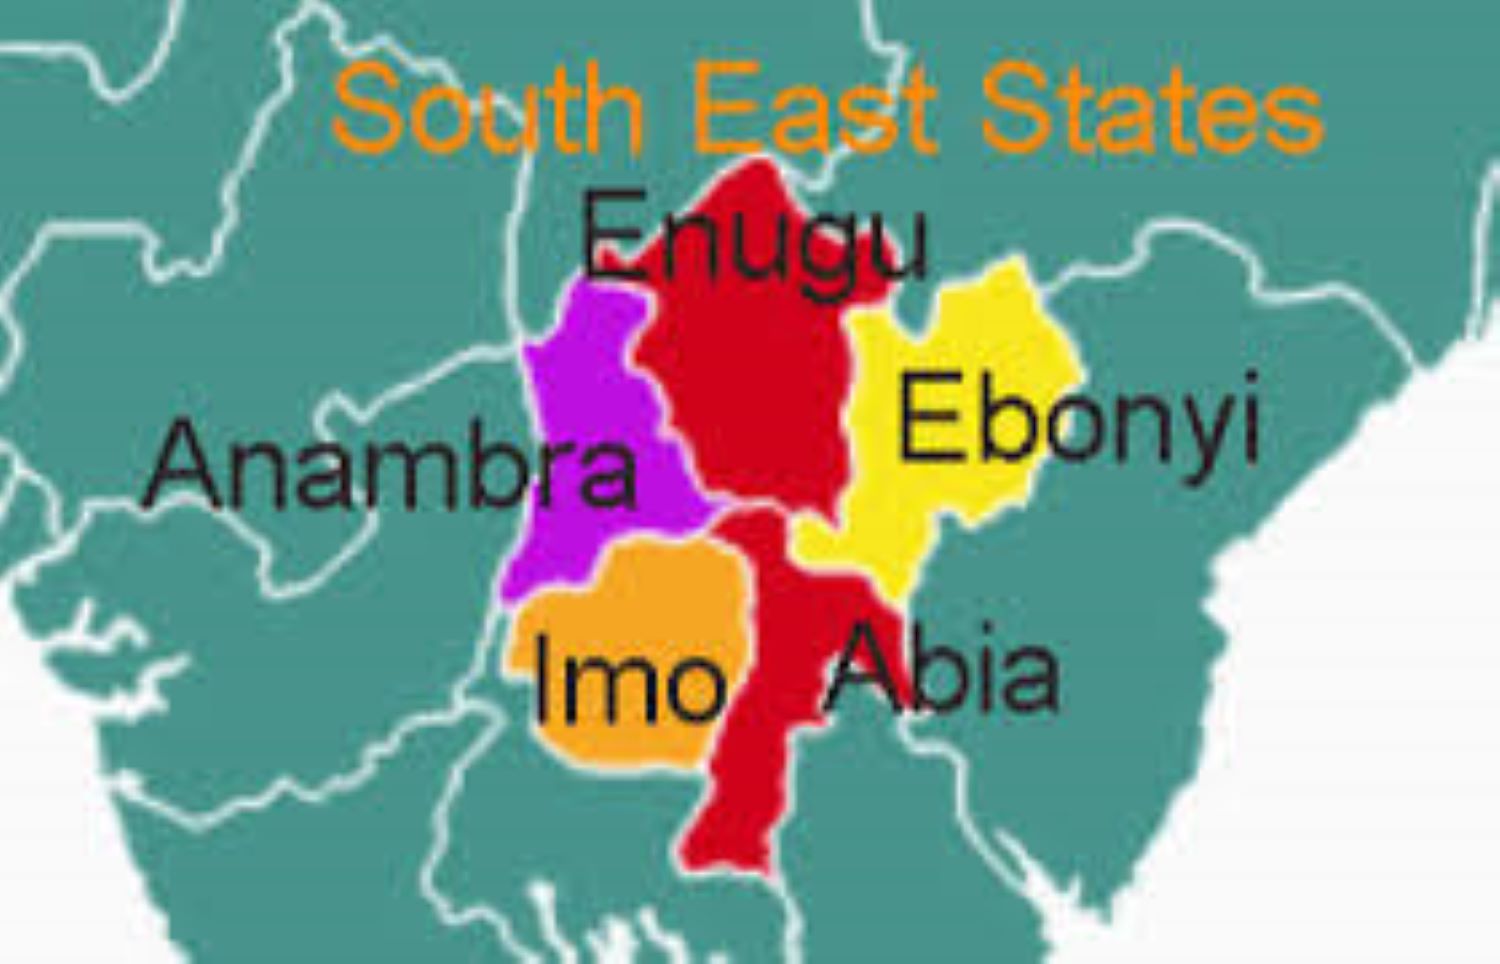 South-East governors